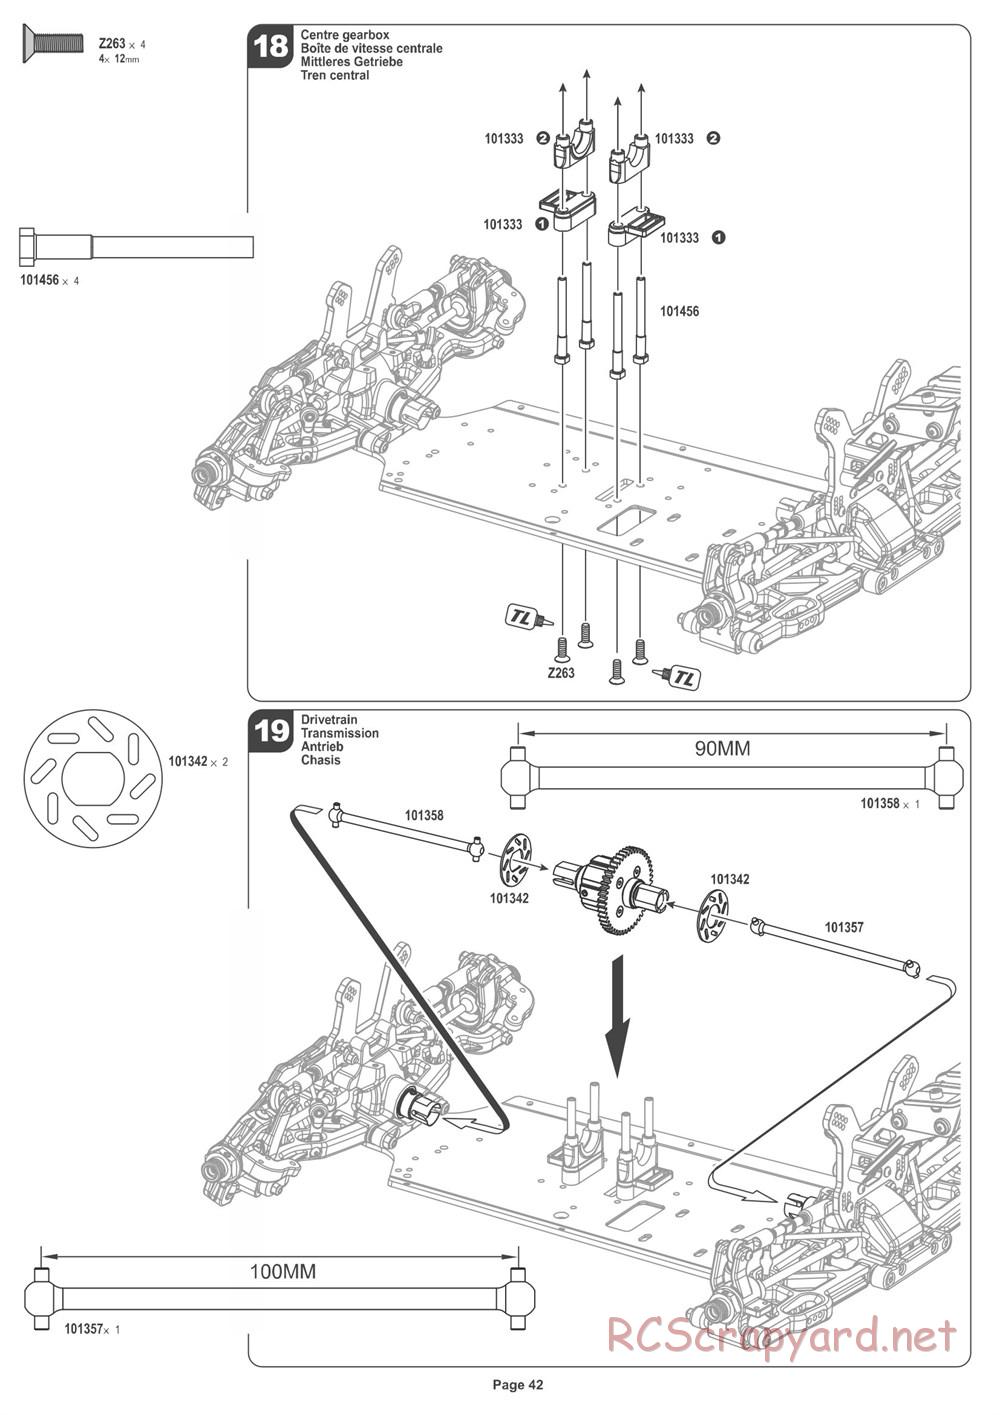 HPI - Pulse 4.6 Buggy - Manual - Page 42